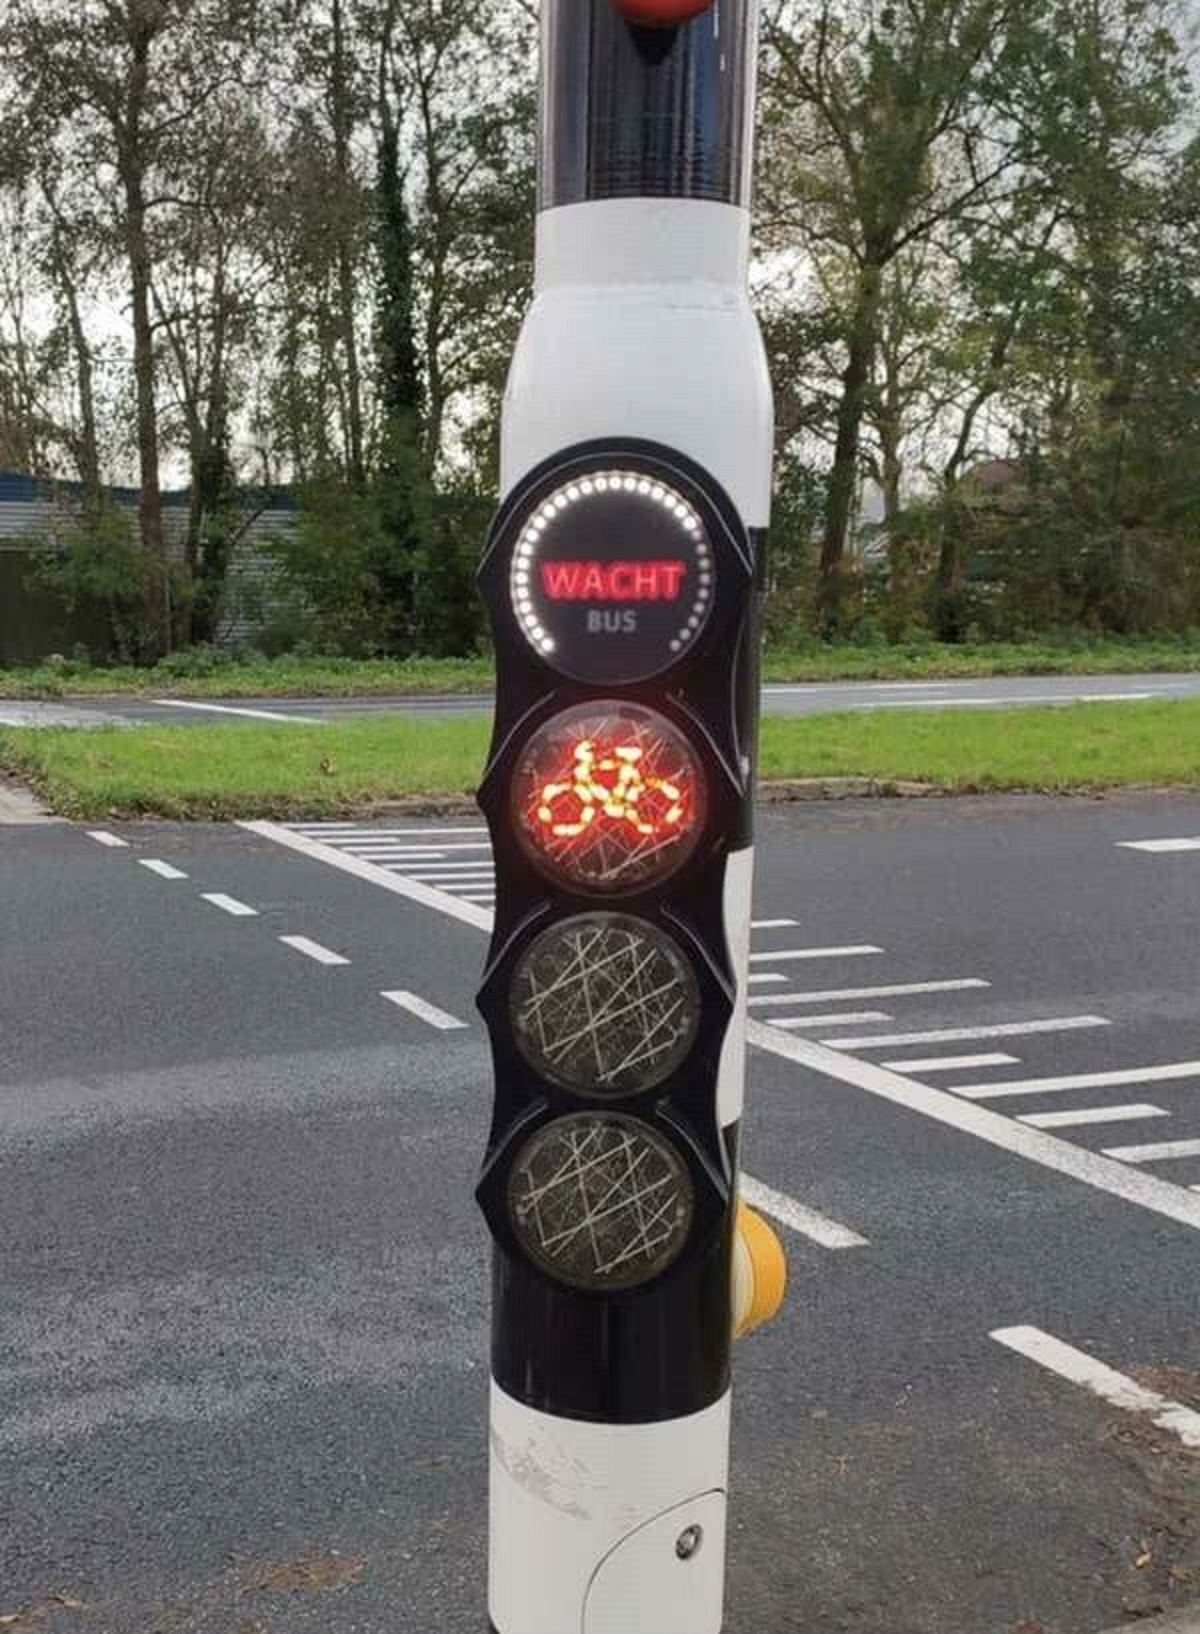 In the Netherlands, traffic lights show you when a bus is approaching, which is next level.